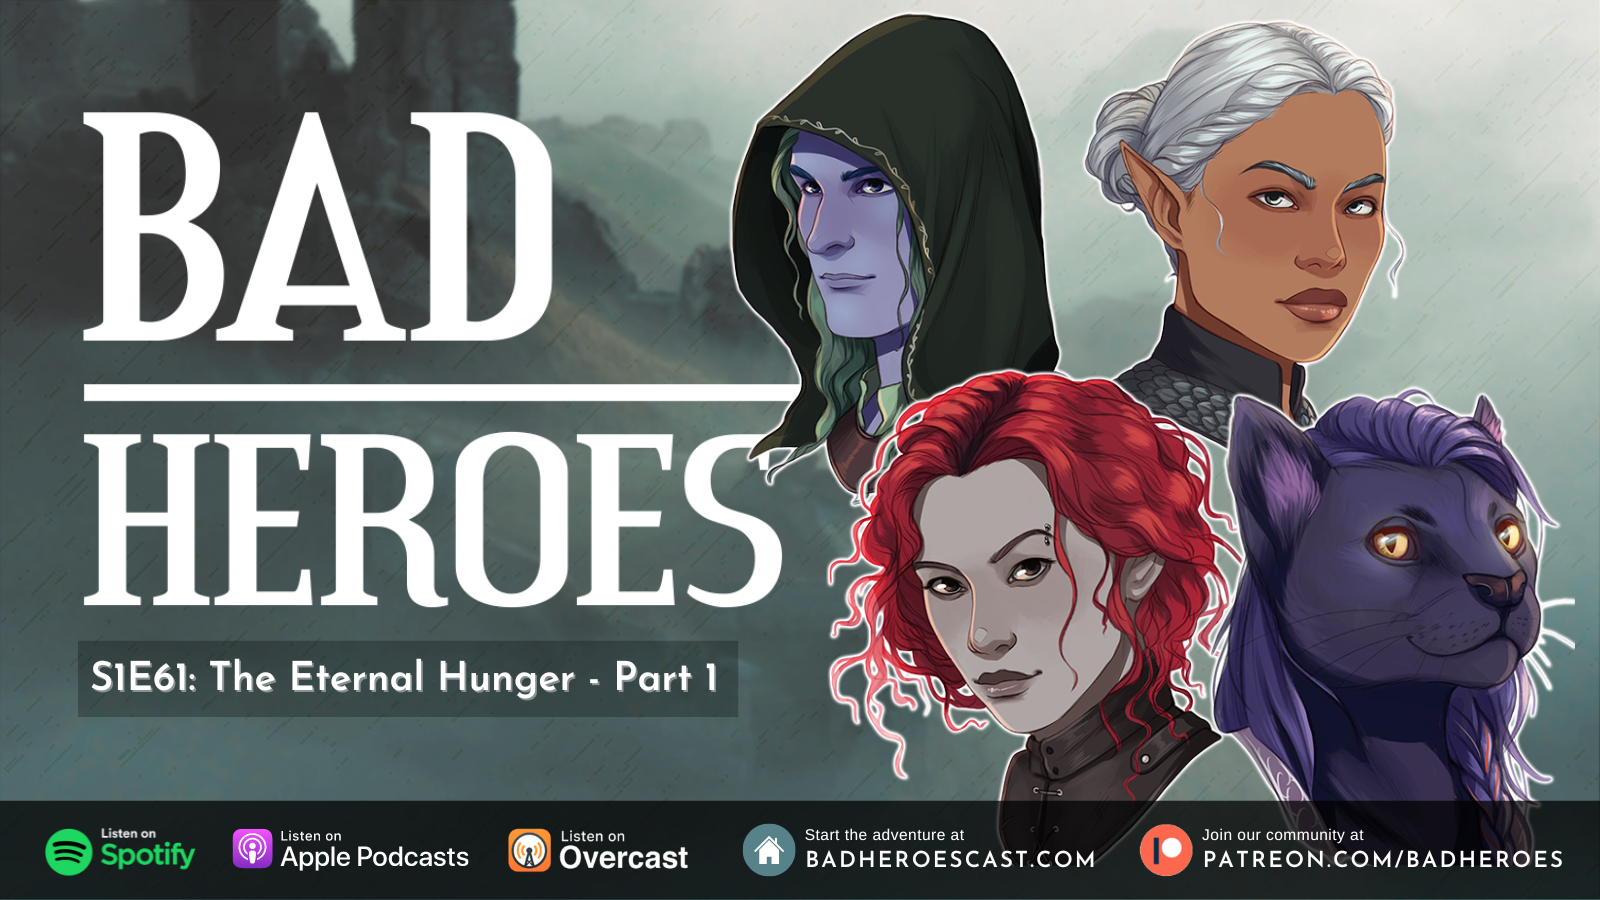 Prepare for The Eternal Hunger: The premiere episode of Bad Heroes’ third arc is here